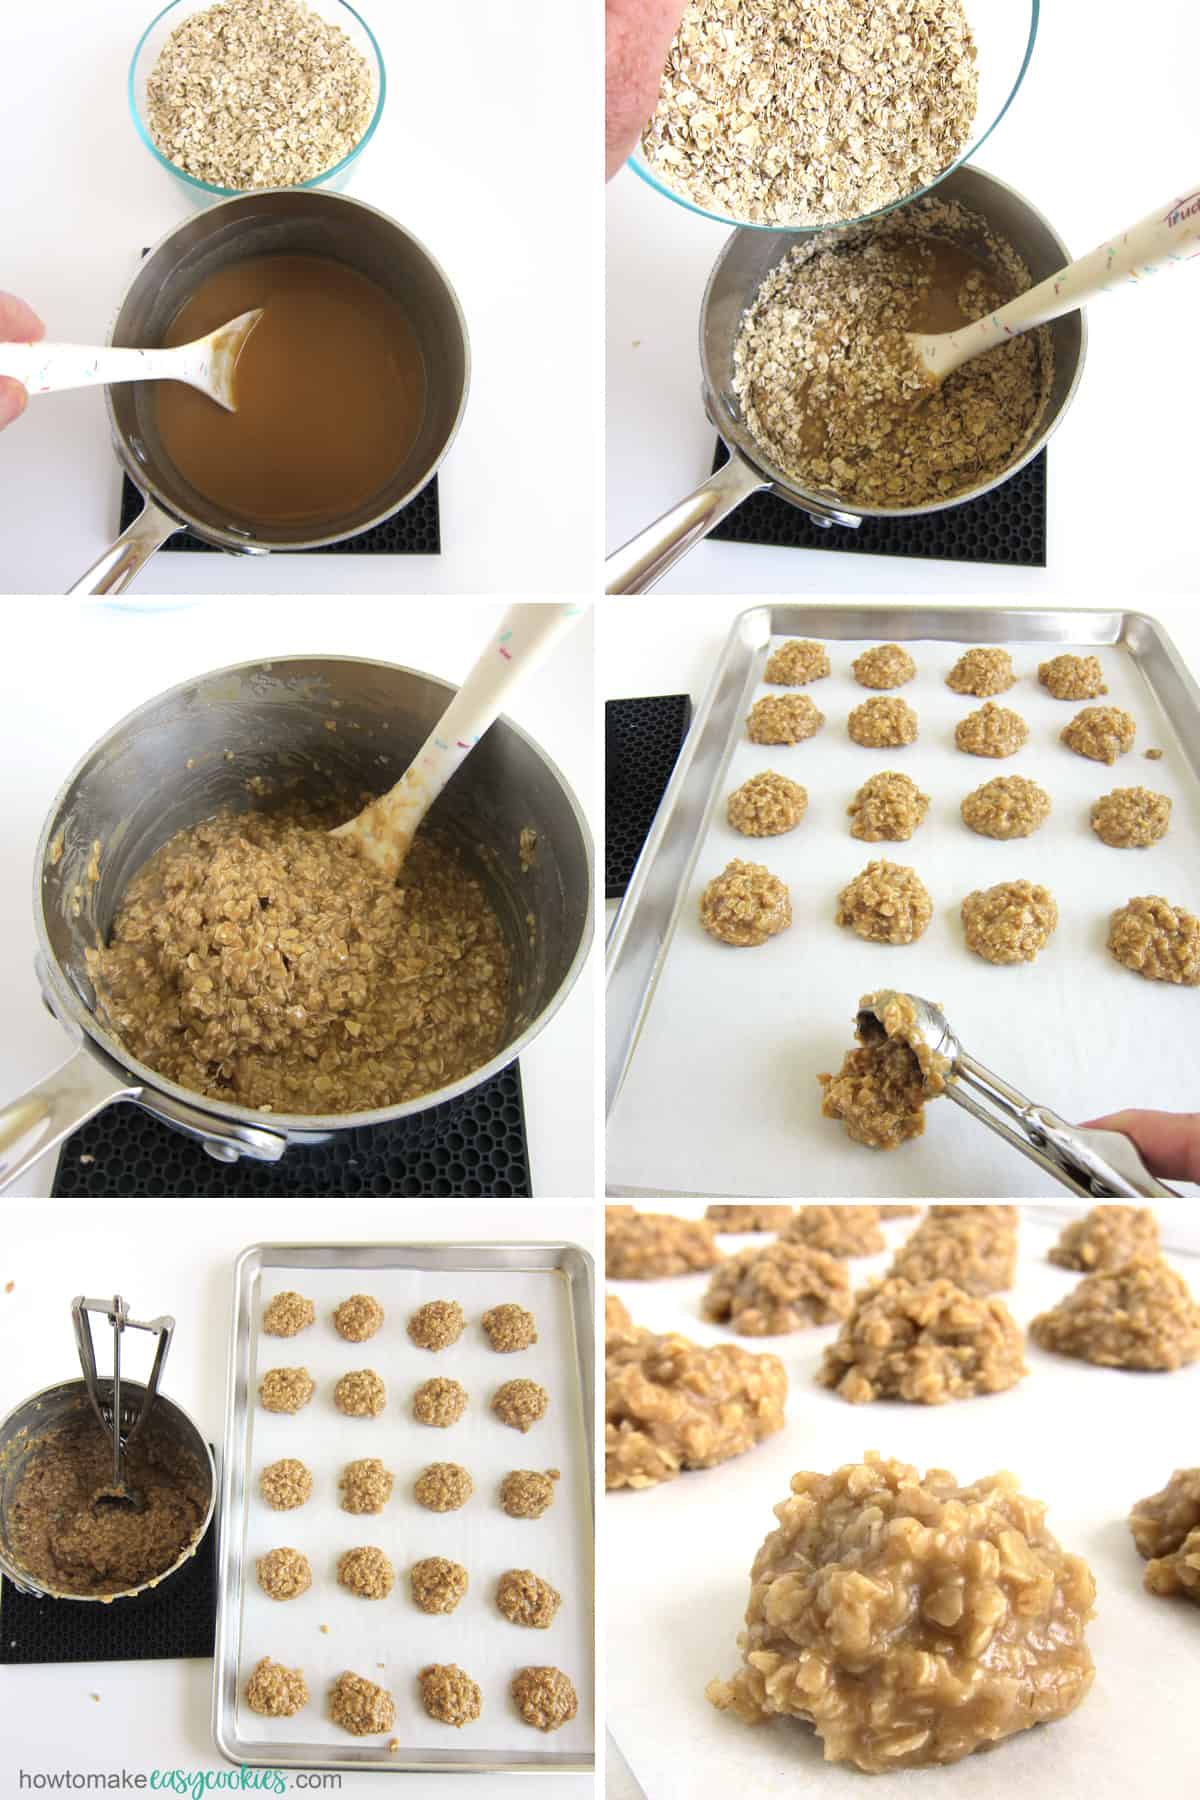 stir oatmeal into the peanut butter mixture, then scoop the dough onto baking sheets